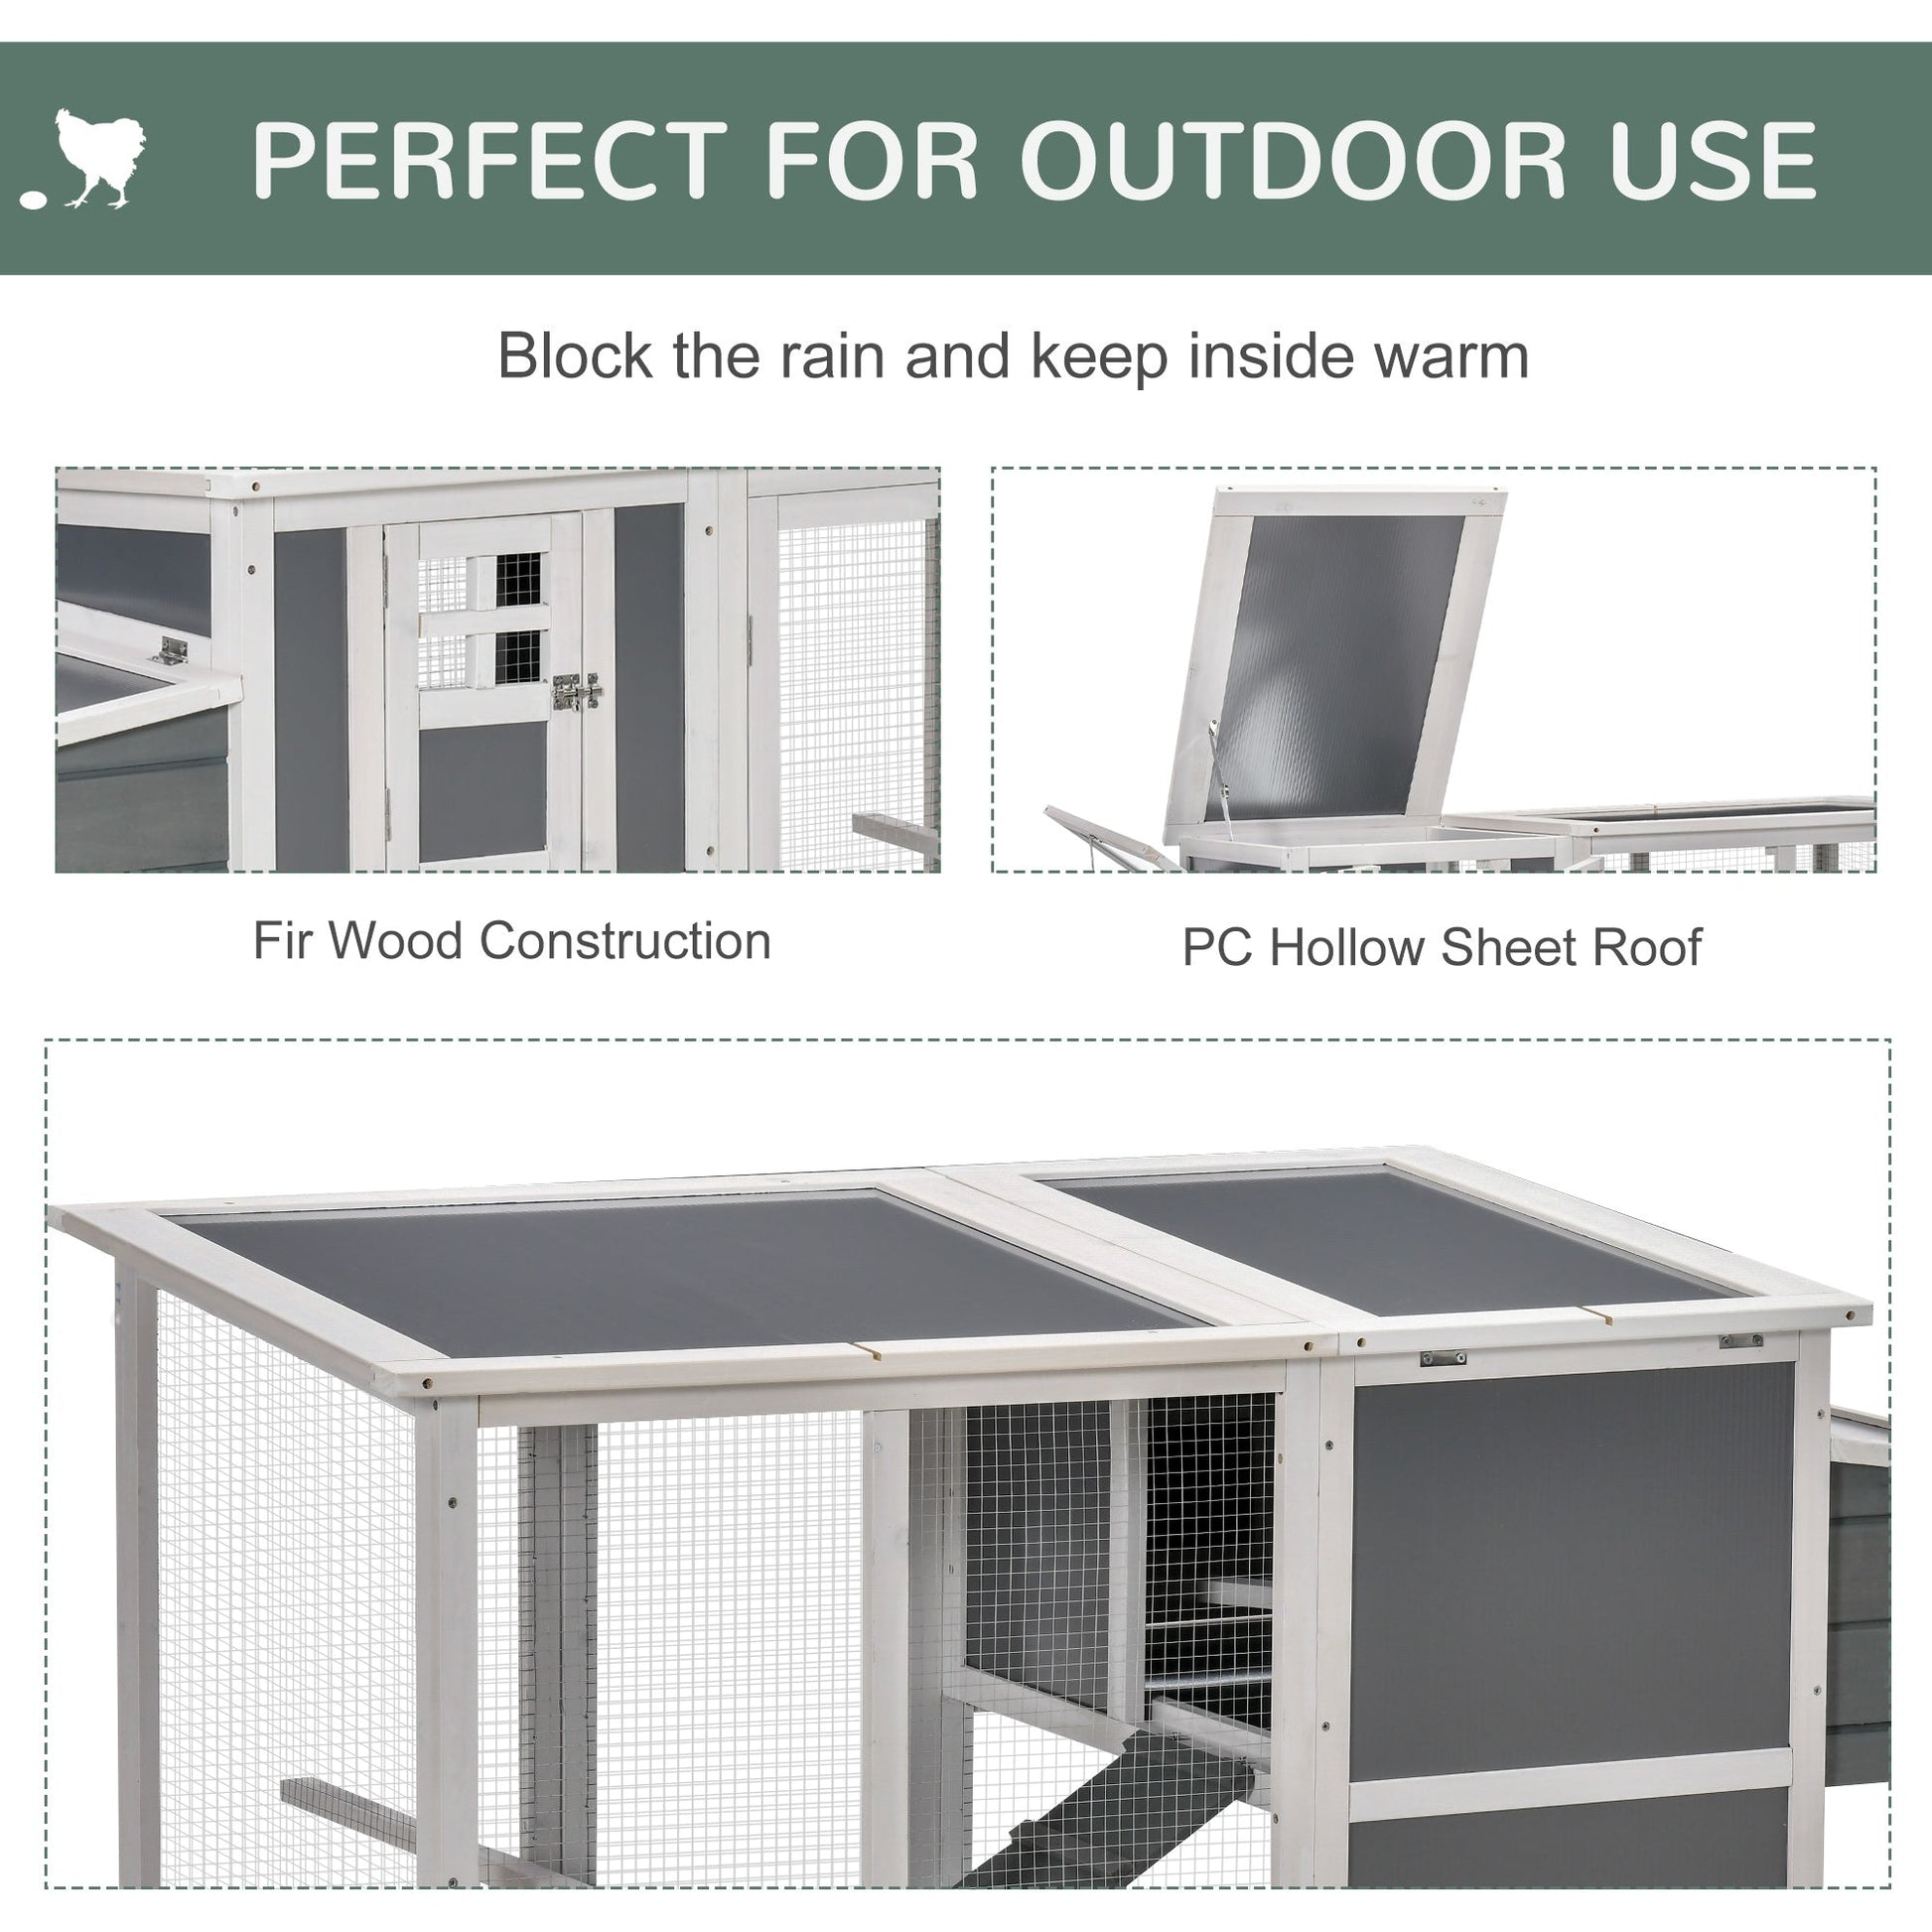 64" Wooden Chicken Coop, Outdoor Hen House Poultry Cage with Outdoor Run, Nesting Box, Removable Tray, Openable Hollow Sheet Roof and Lockable Doors - Gallery Canada